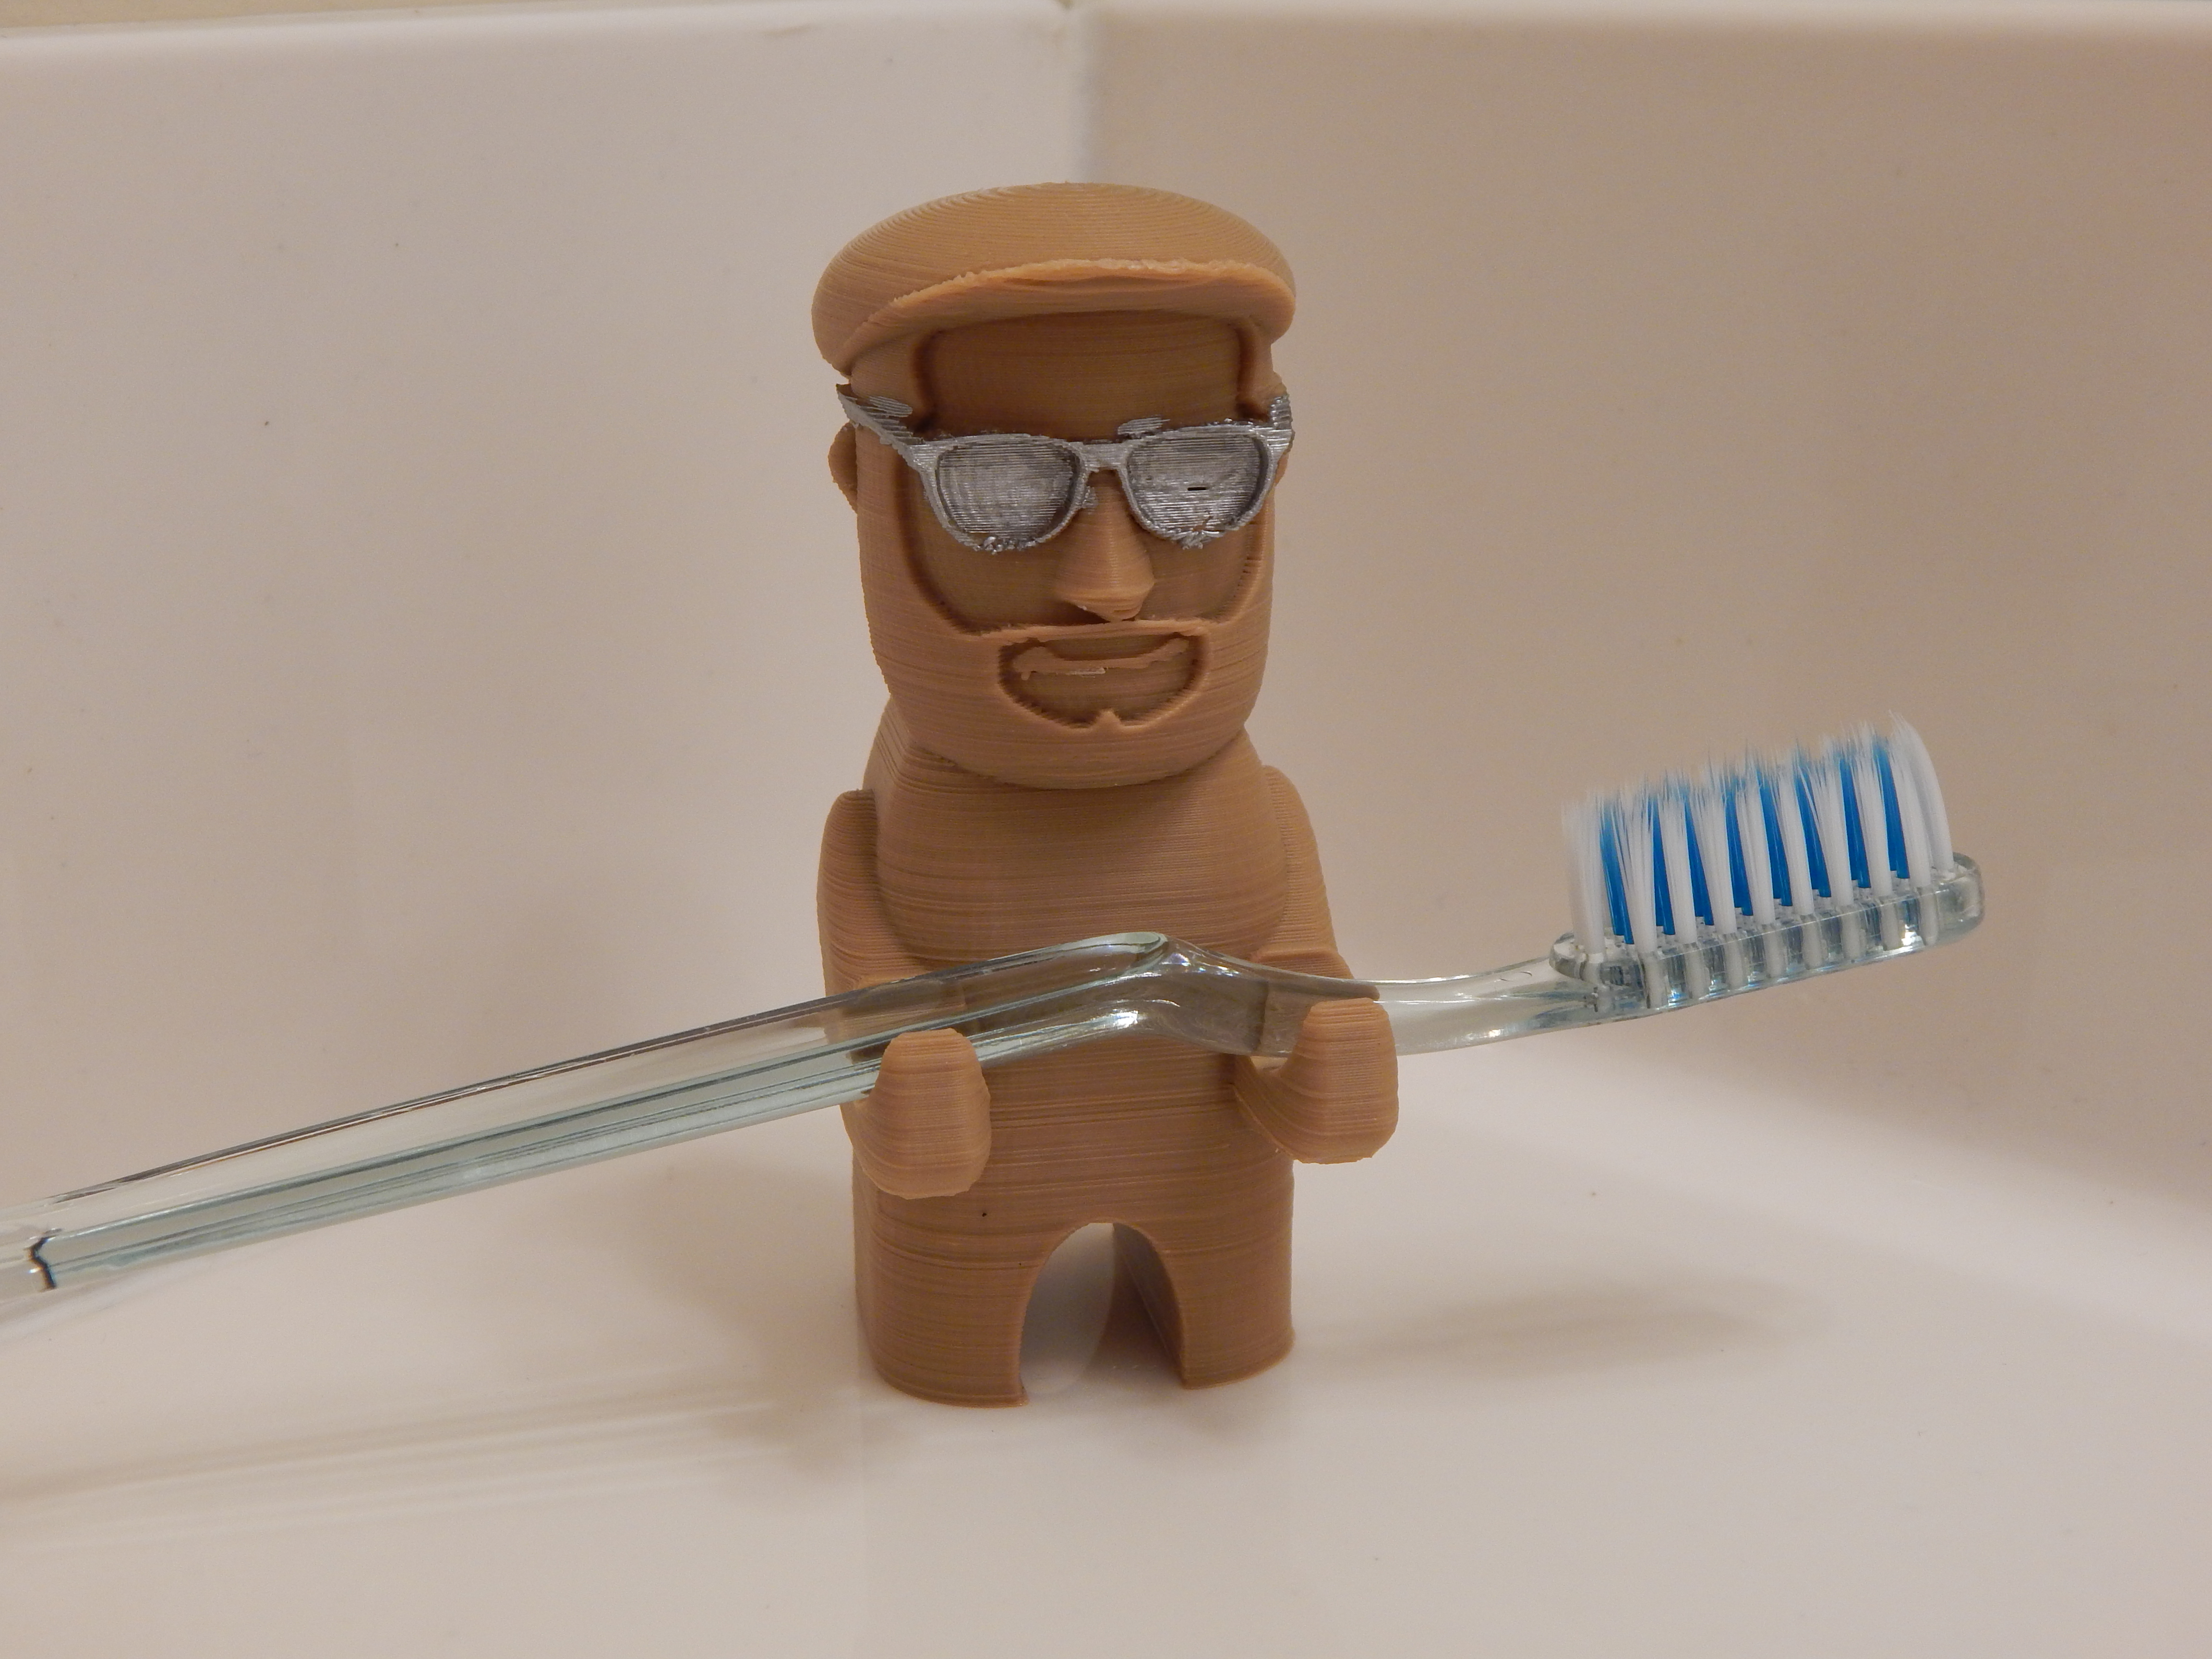 Lil' JOSEF PRUSA Holds Toothbrushes